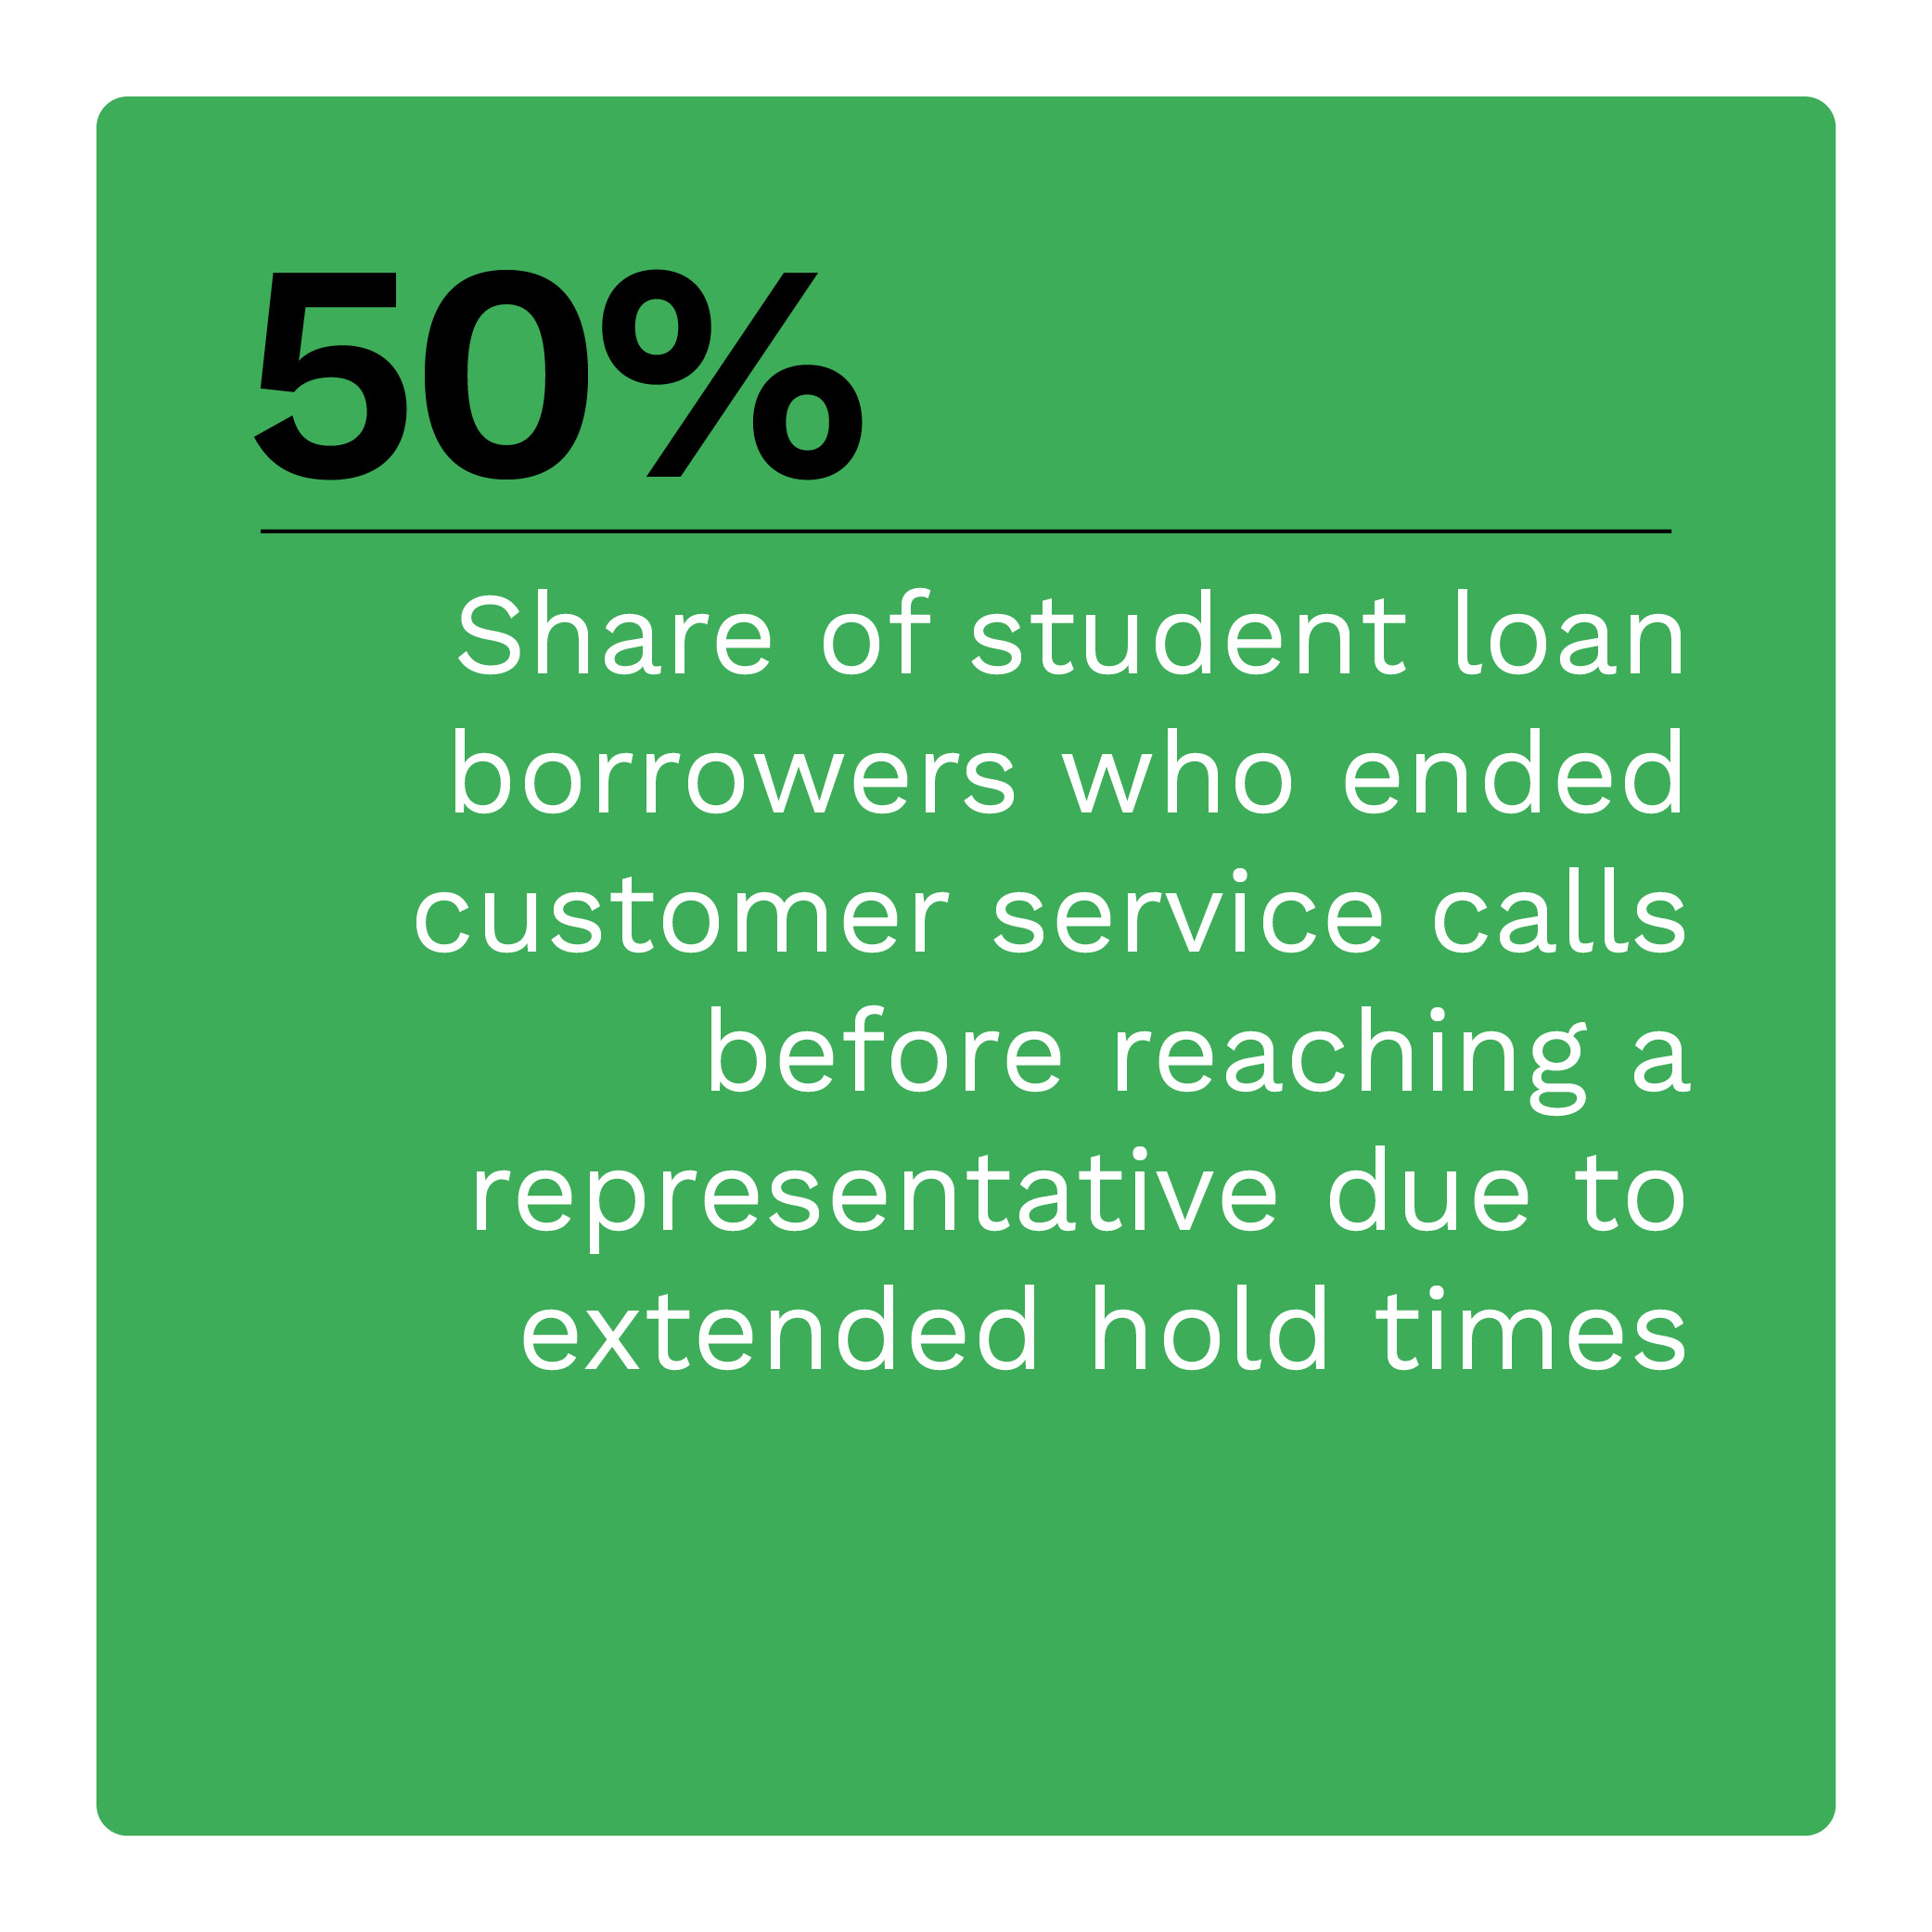 50%: Share of student loan borrowers who ended customer service calls before reaching a representative due to extended hold times